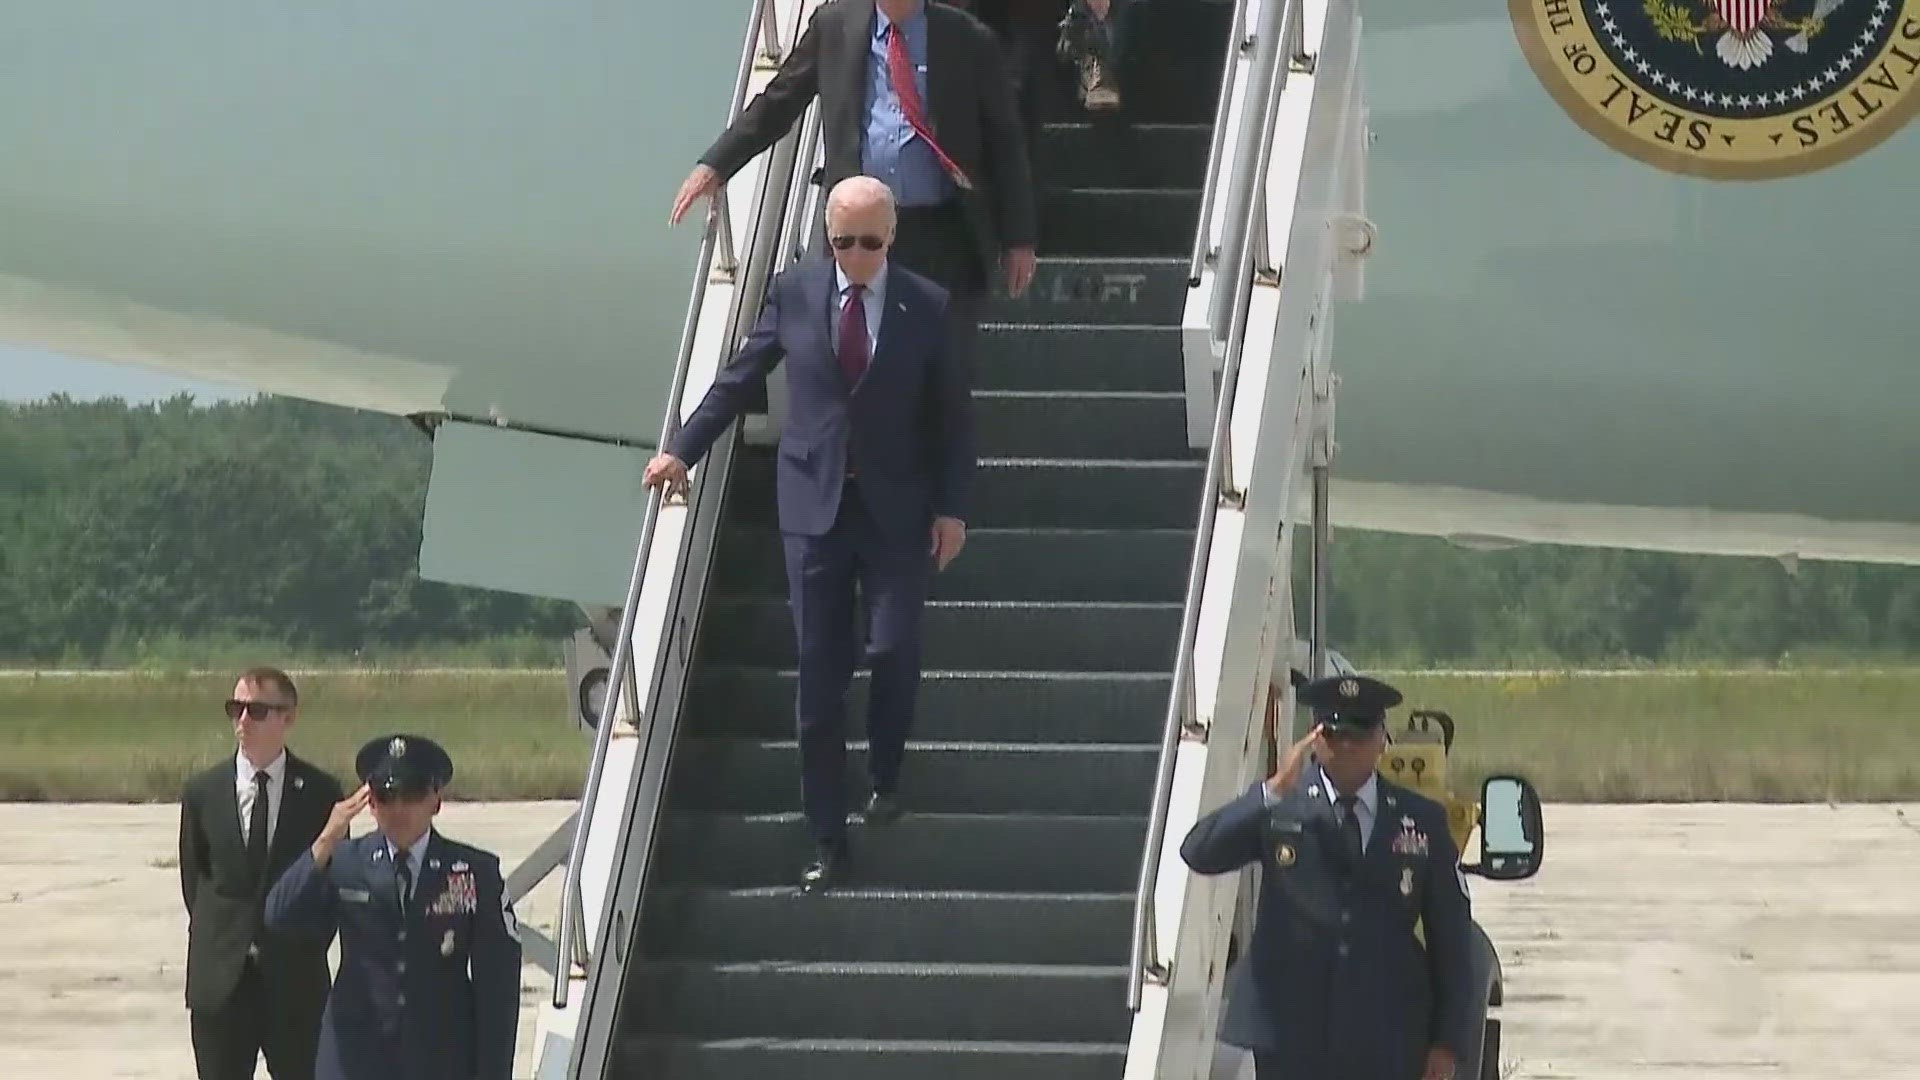 The president touched down at the Brunswick Executive Airport on his first visit to Maine since 2018.